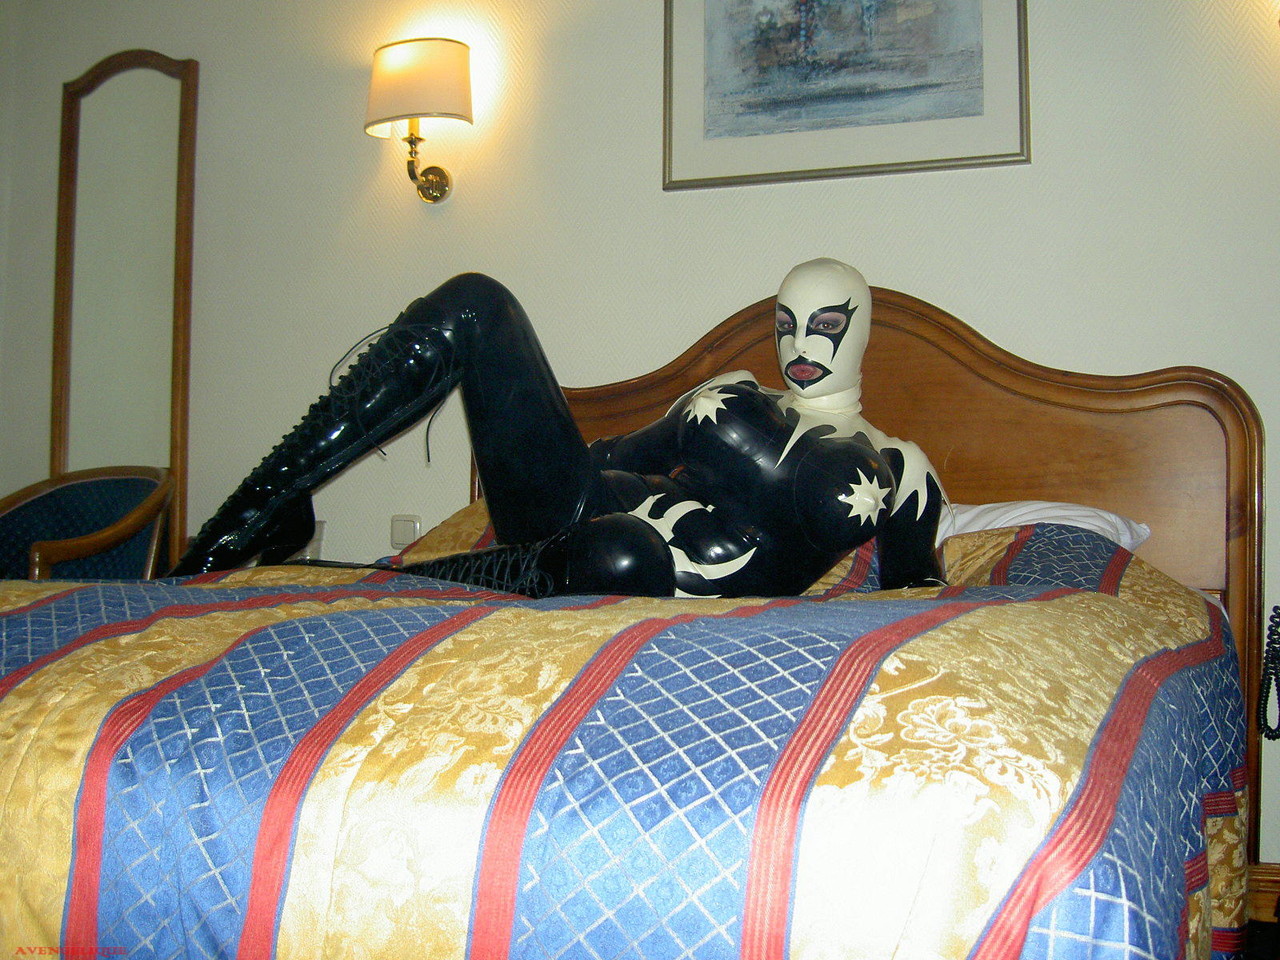 Fetish model Darkwing Zero poses on a hotel room bed in latex clothing foto porno #426050021 | Rubber Tits Pics, Darkwing Zero, Latex, porno mobile